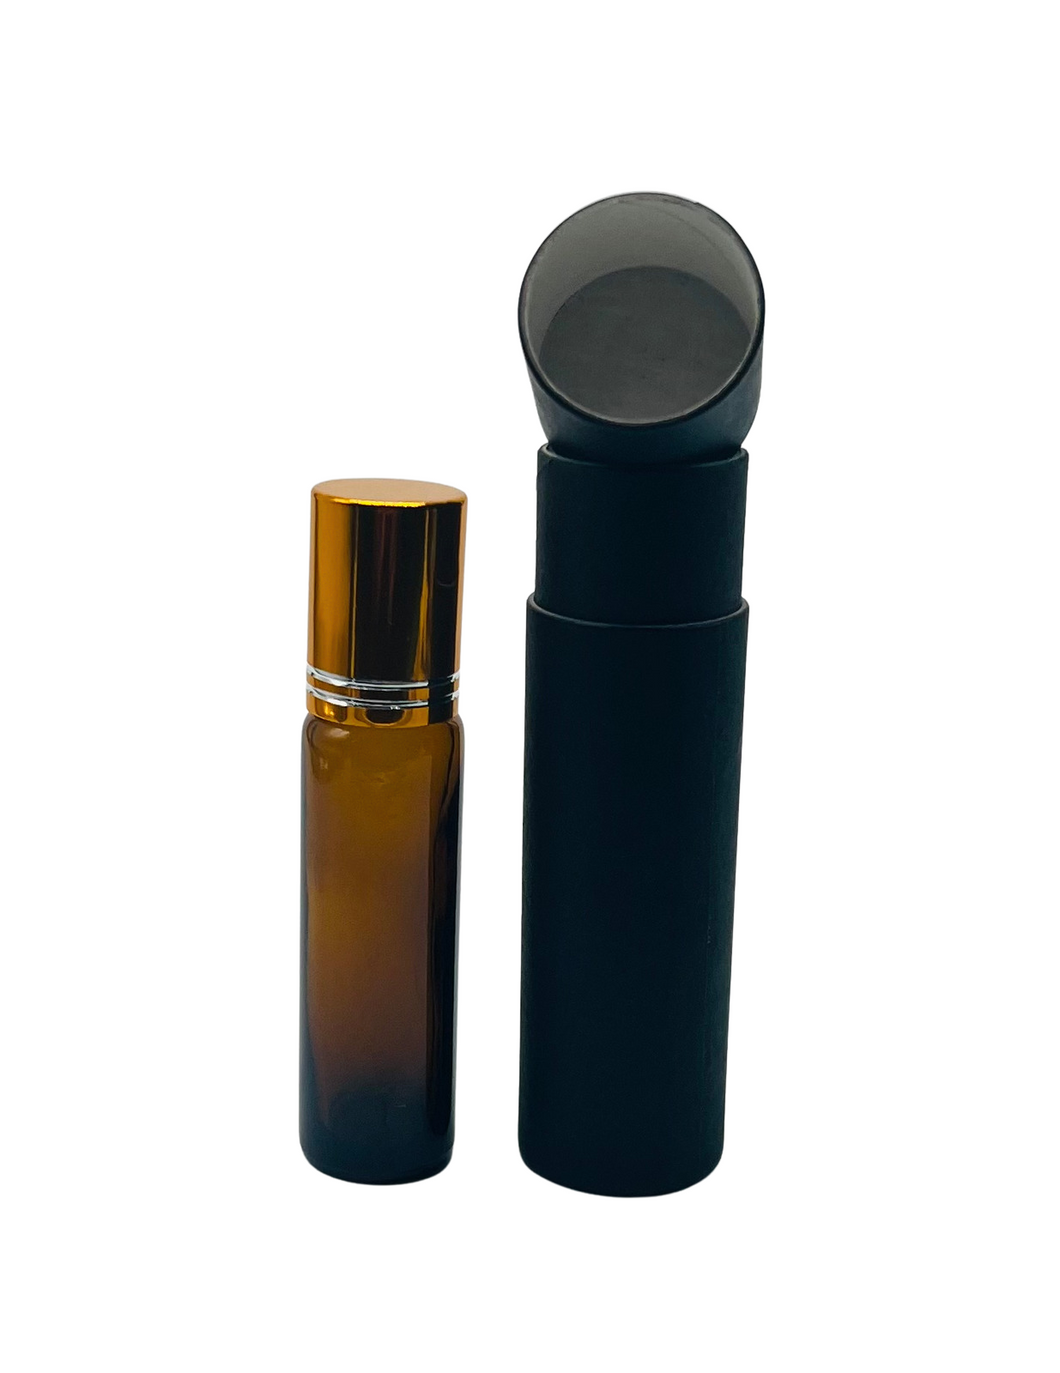 10 ml Glass Roller Bottles with Paper Tube Packaging